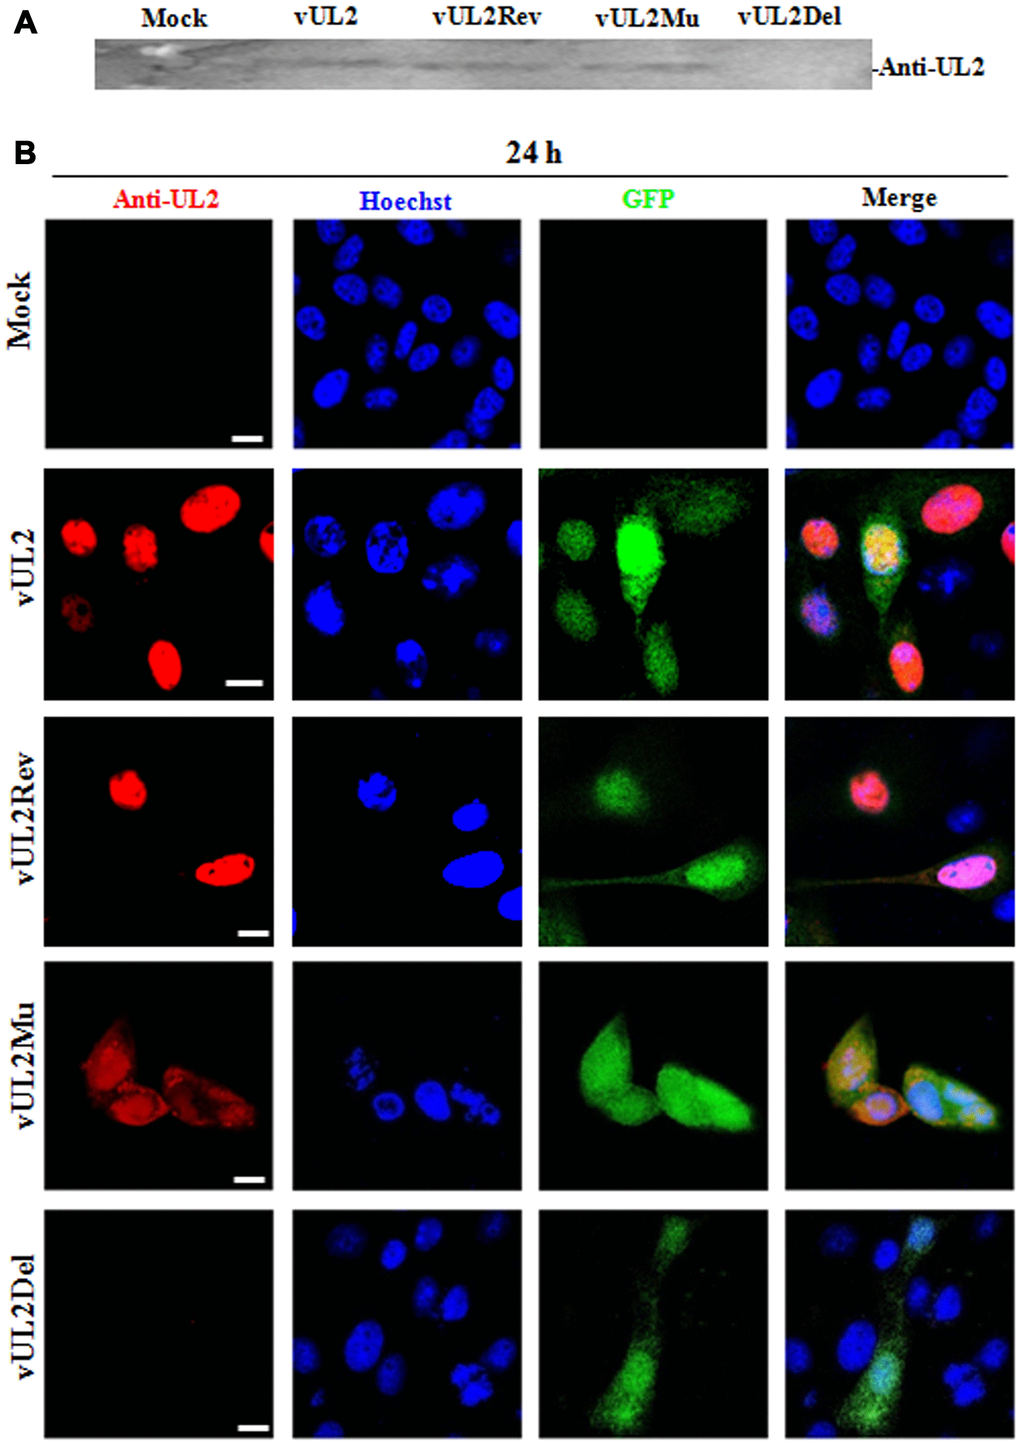 Protein expression and subcellular localization of UL2 in different recombinant viruses-infected cells. (A) Monolayer HEK293T cells were infected with different reconstitute virus vUL2, vUL2Del, vUL2Mu or vUL2Rev at an MOI of 1 for 24 h, and cells were harvested when CPE reached 90-95%. Cell lysates were then subjected to WB analysis using the prepared anti-UL2 pAb and AP-conjugated goat anti-rat IgG. (B) Vero cells infected with different reconstitute virus vUL2, vUL2Del, vUL2Mu or vUL2Rev at an MOI of 1 for 24 h, then cells were subjected to IFA using anti-UL2 pAb and Dylight 649 conjugated goat anti-rat IgG, to show the subcellular localization of UL2. Cells were finally counterstained with Hoechst to visualize the nuclei. GFP was also captured to show the cells were successfully infected by HSV-1. All scale bars indicate 10 μm.